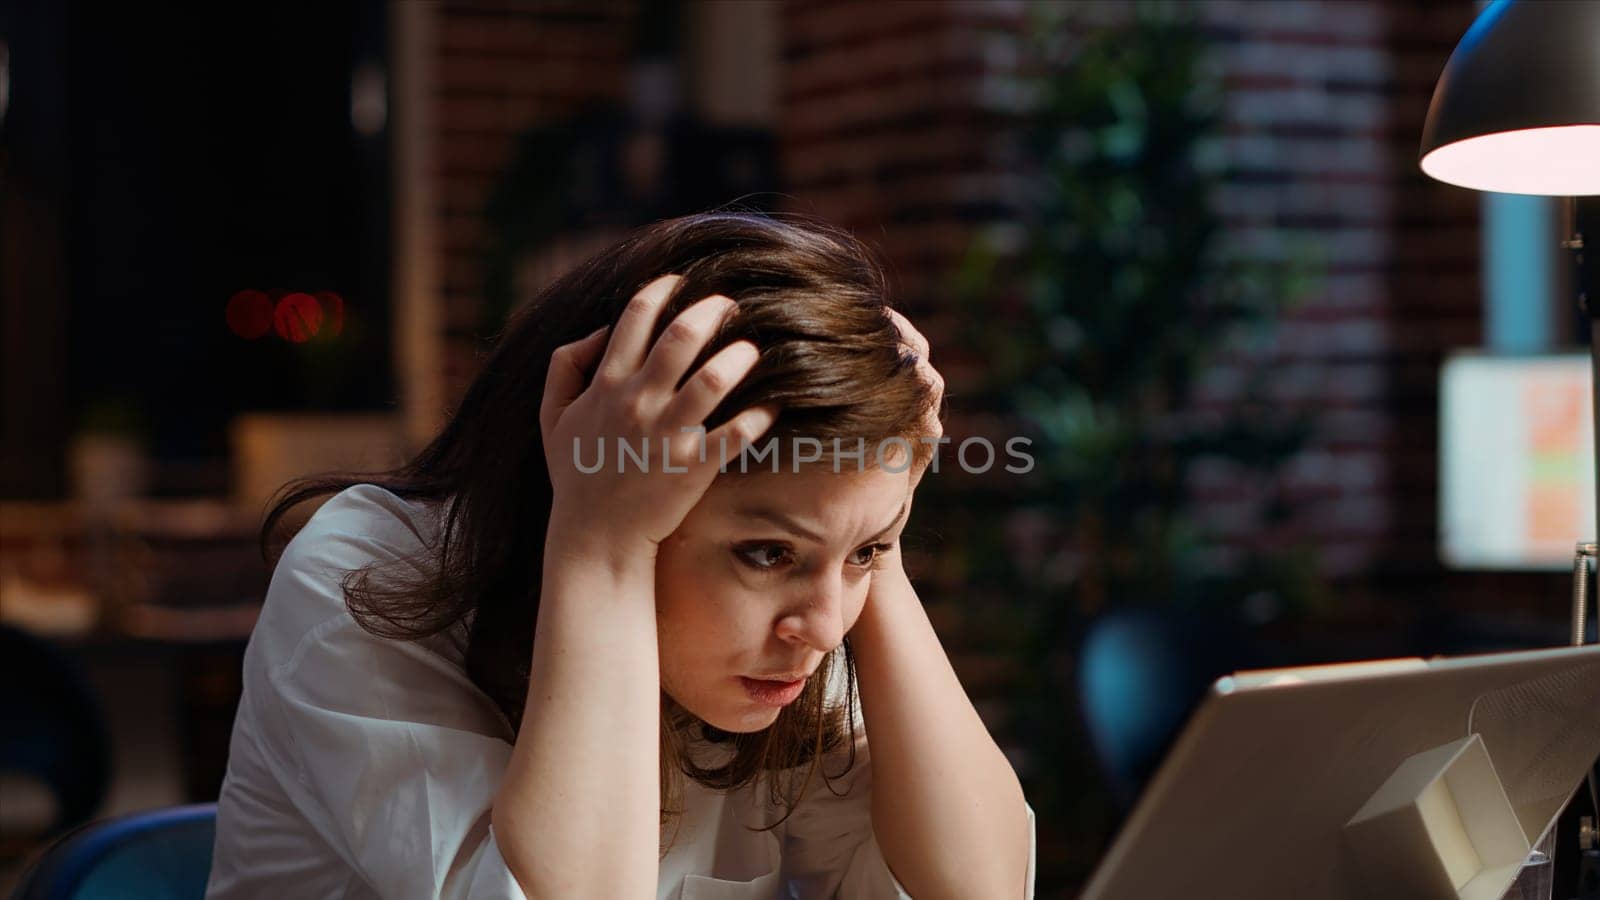 Worker frustrated by mistake she made while inputting data on laptop while working on company project overnight. Close up shot of upset businesswoman realizing error she made